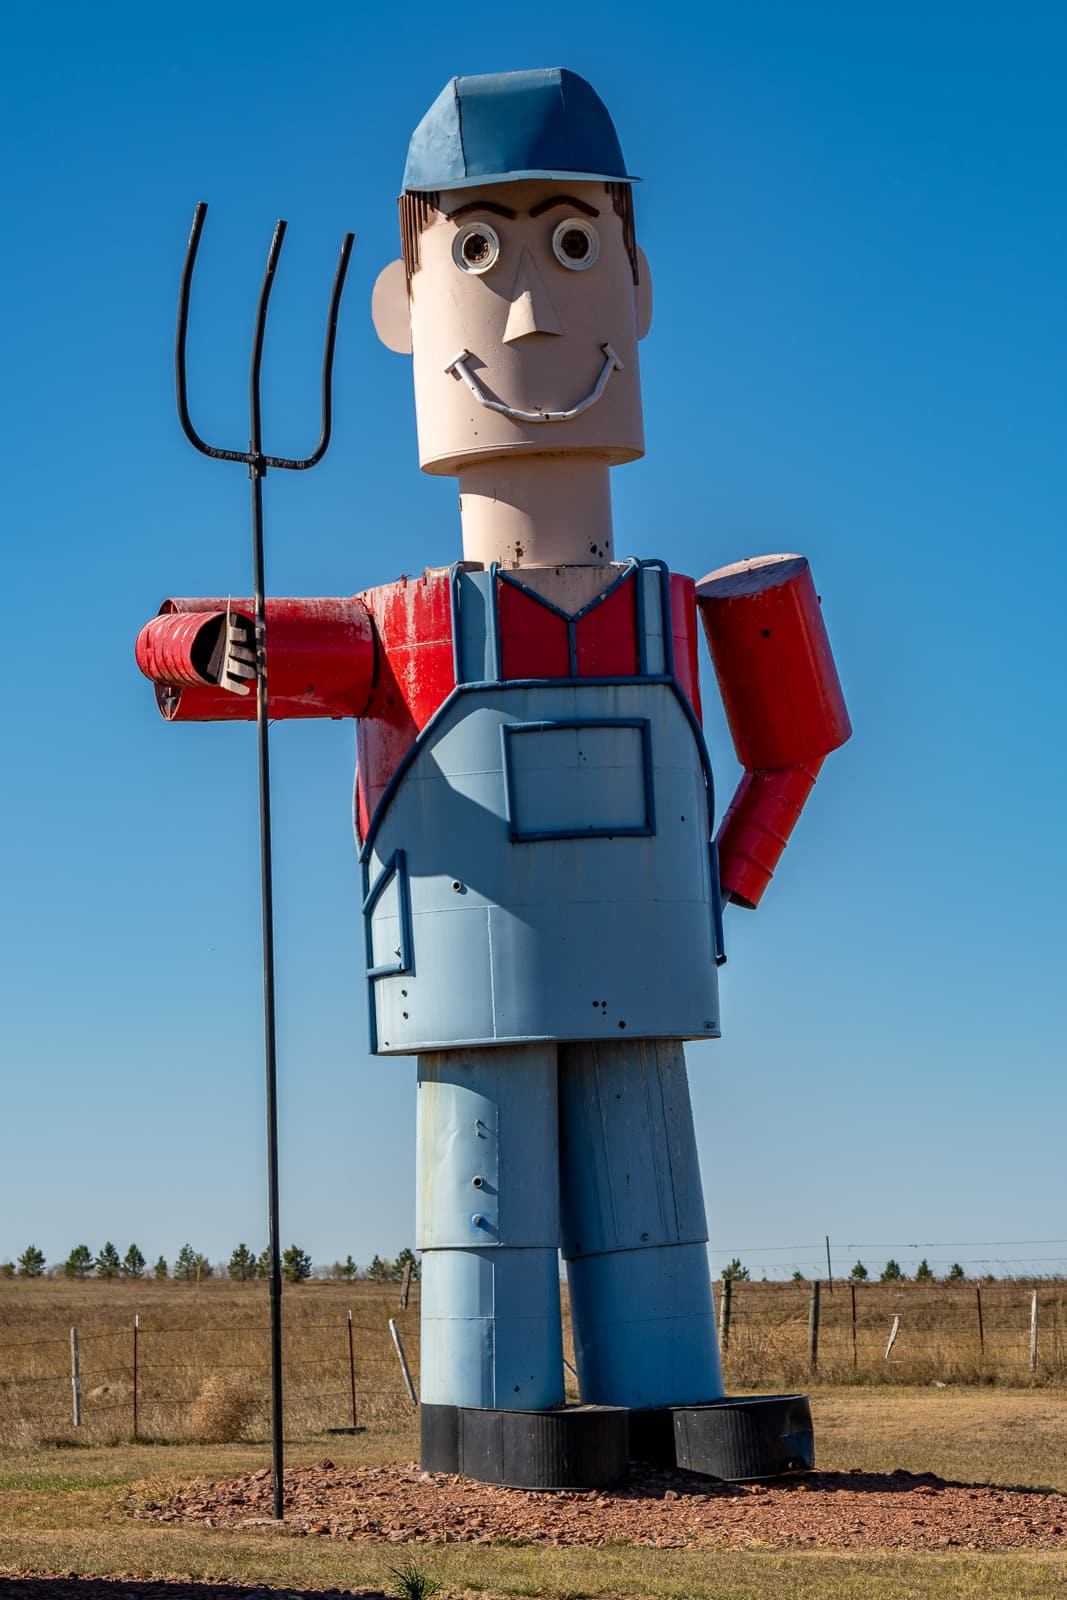 This is a head-to-toe view of the father figure in the sculpture by Gary Greff called The Tin Family. It is located along the Enchanted Highway running between I-94 and Regent, North Dakota.